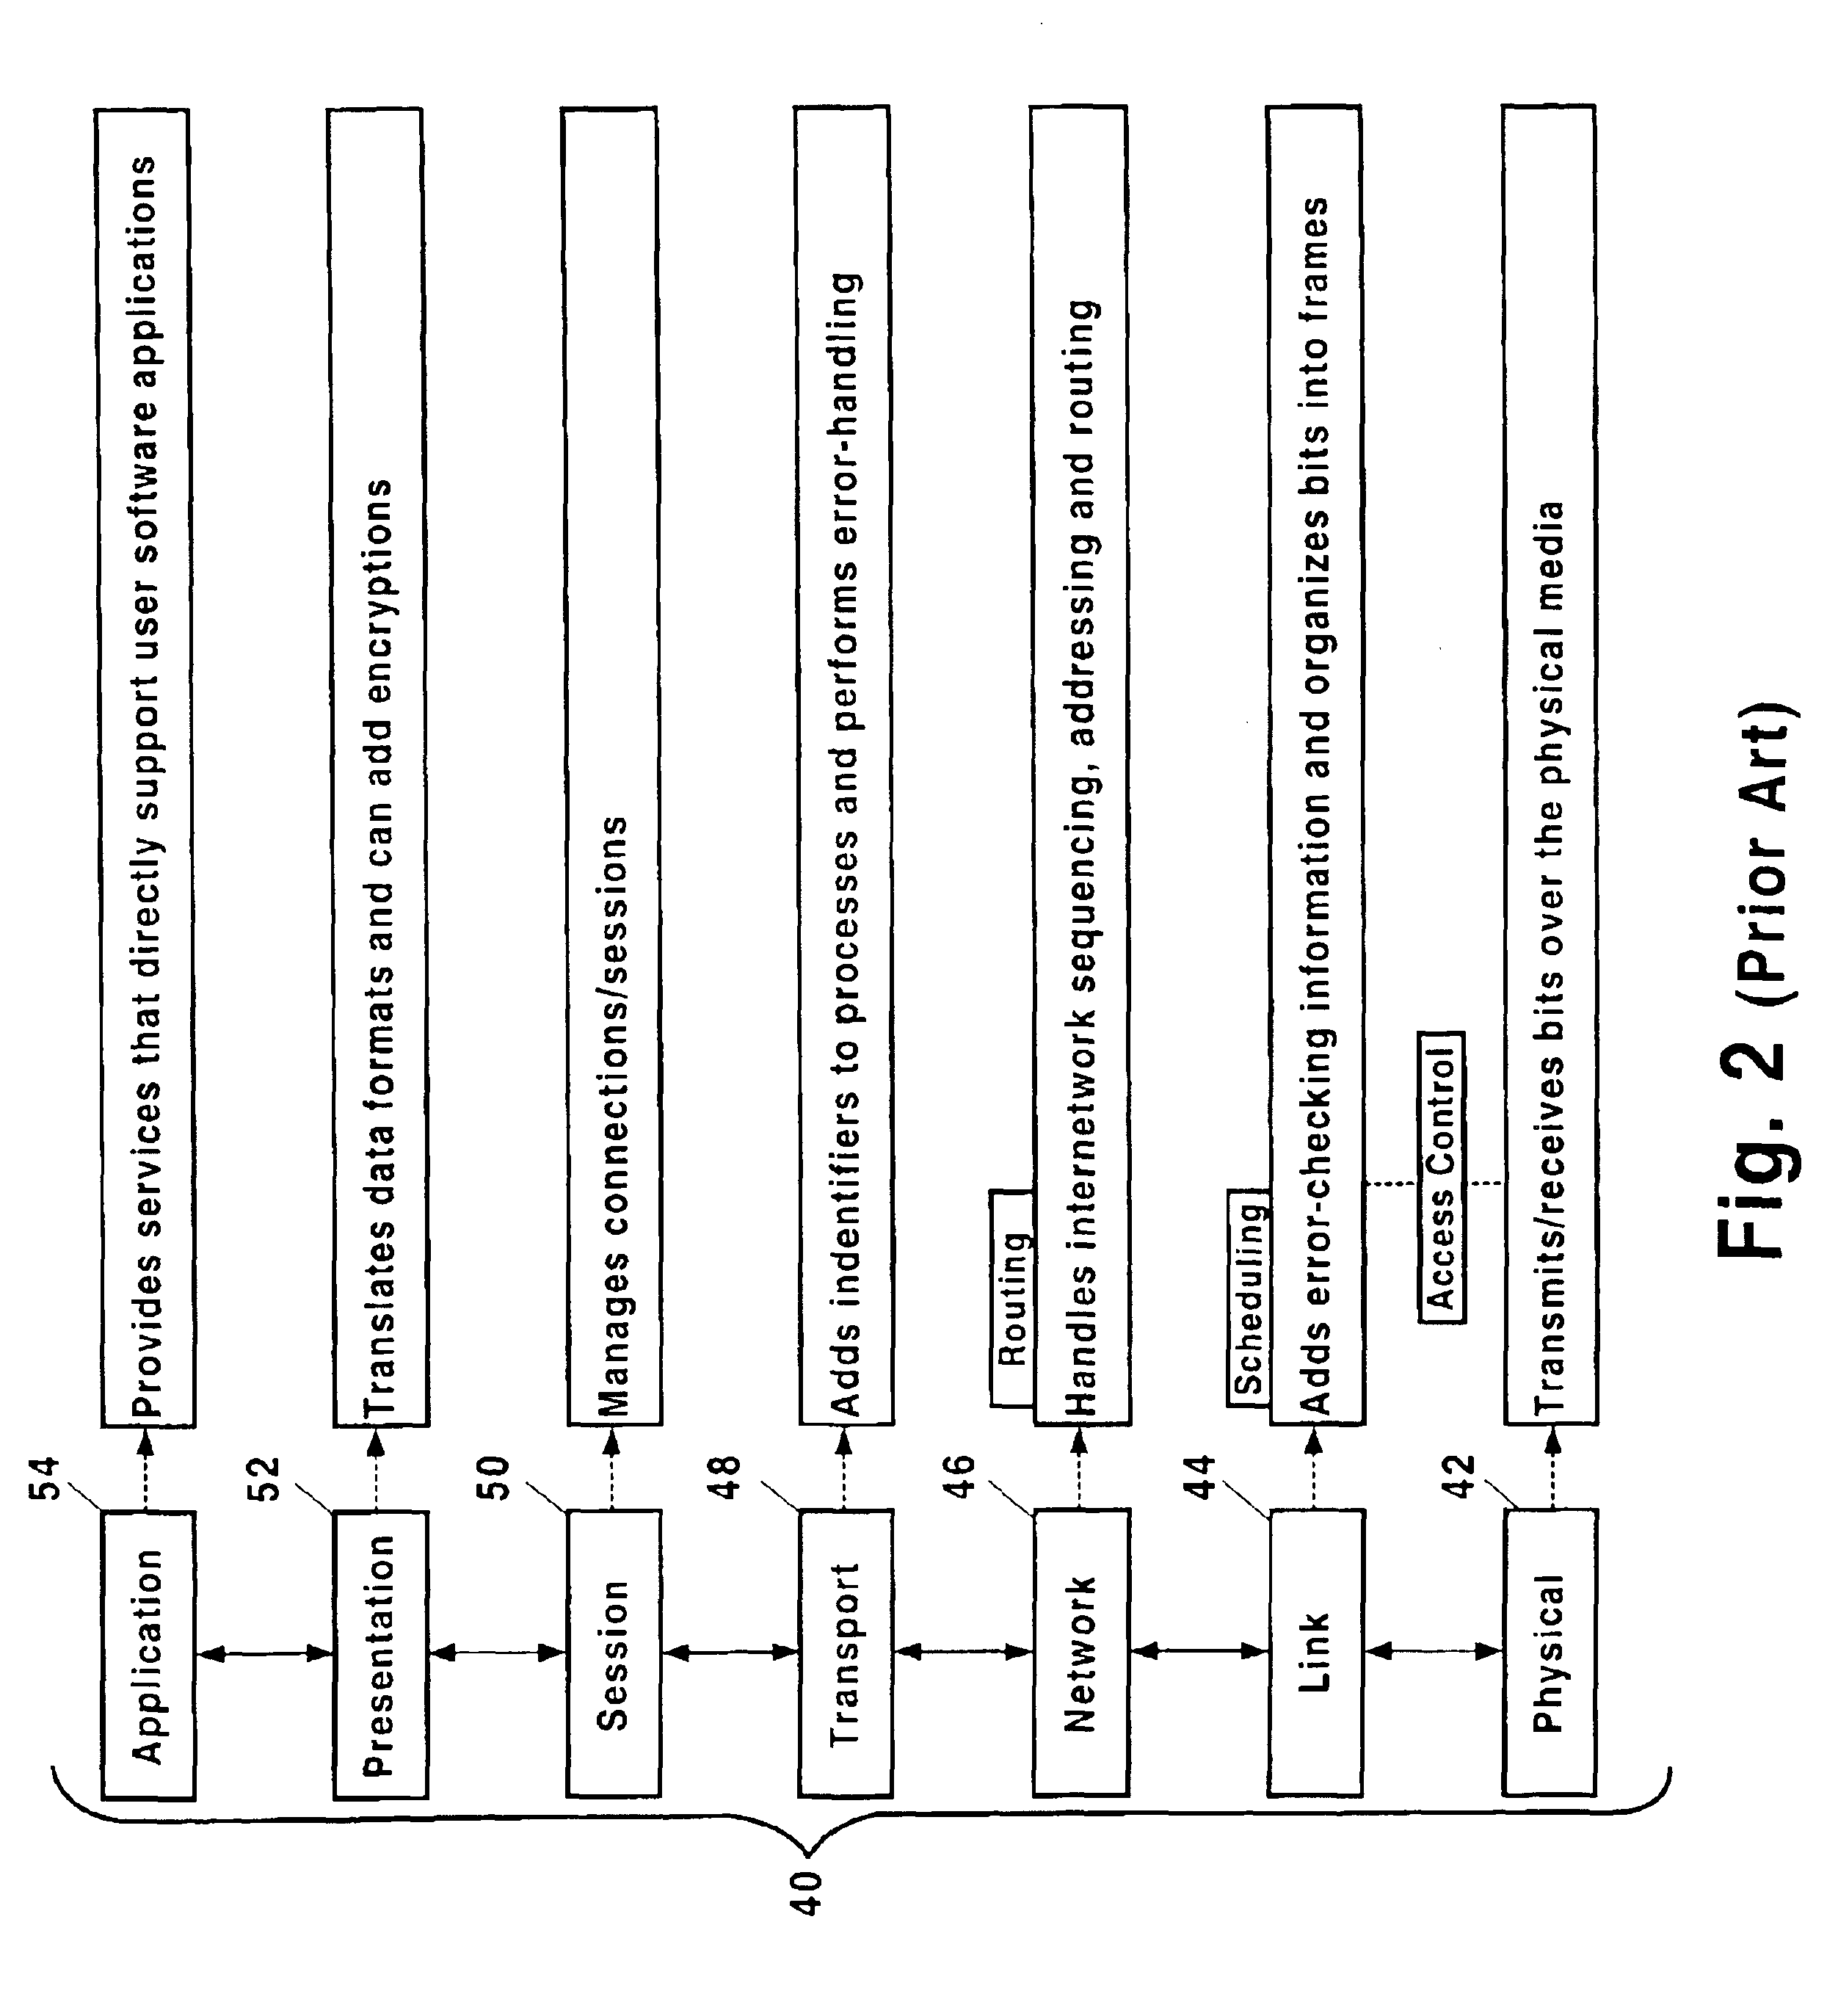 Integrated method for performing scheduling, routing and access control in a computer network